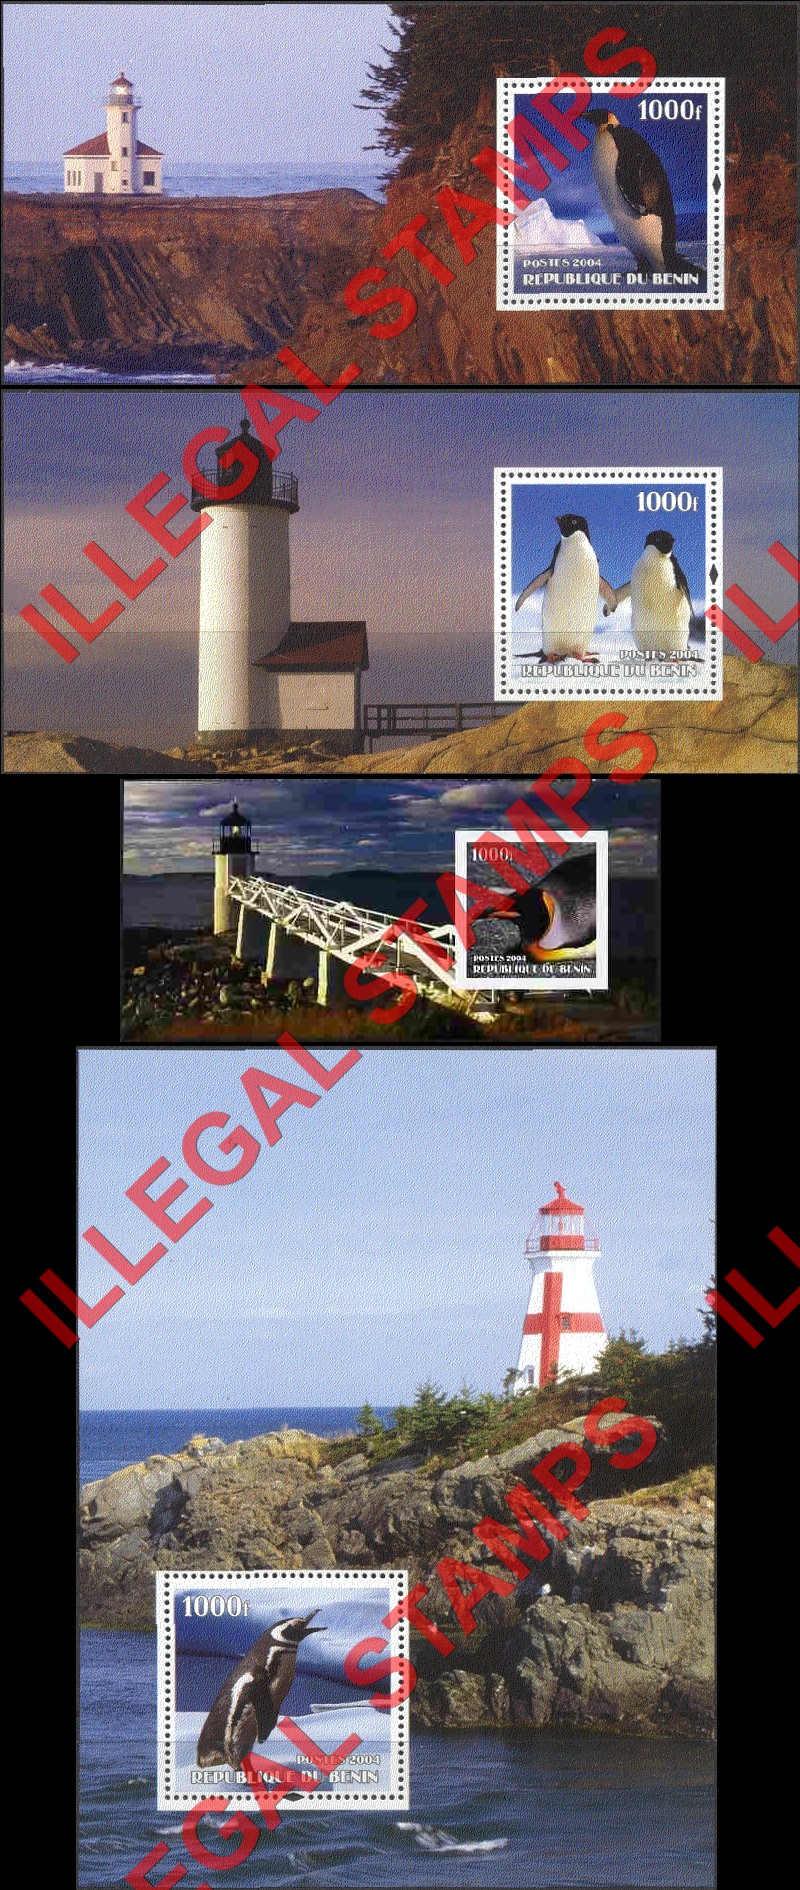 Benin 2004 Penguins and Lighthouses Illegal Stamp Souvenir Sheets of 1